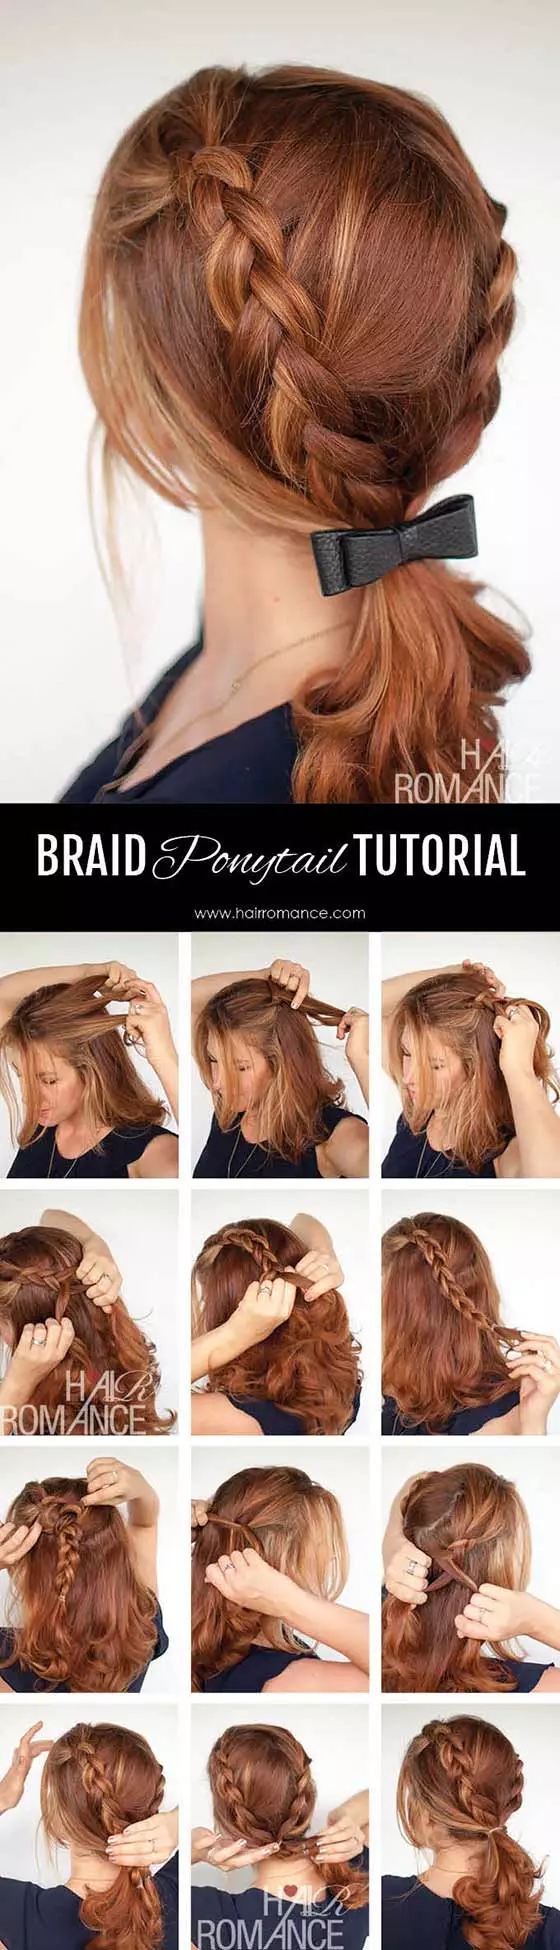 Braid ponytail with bow accessory for long hair